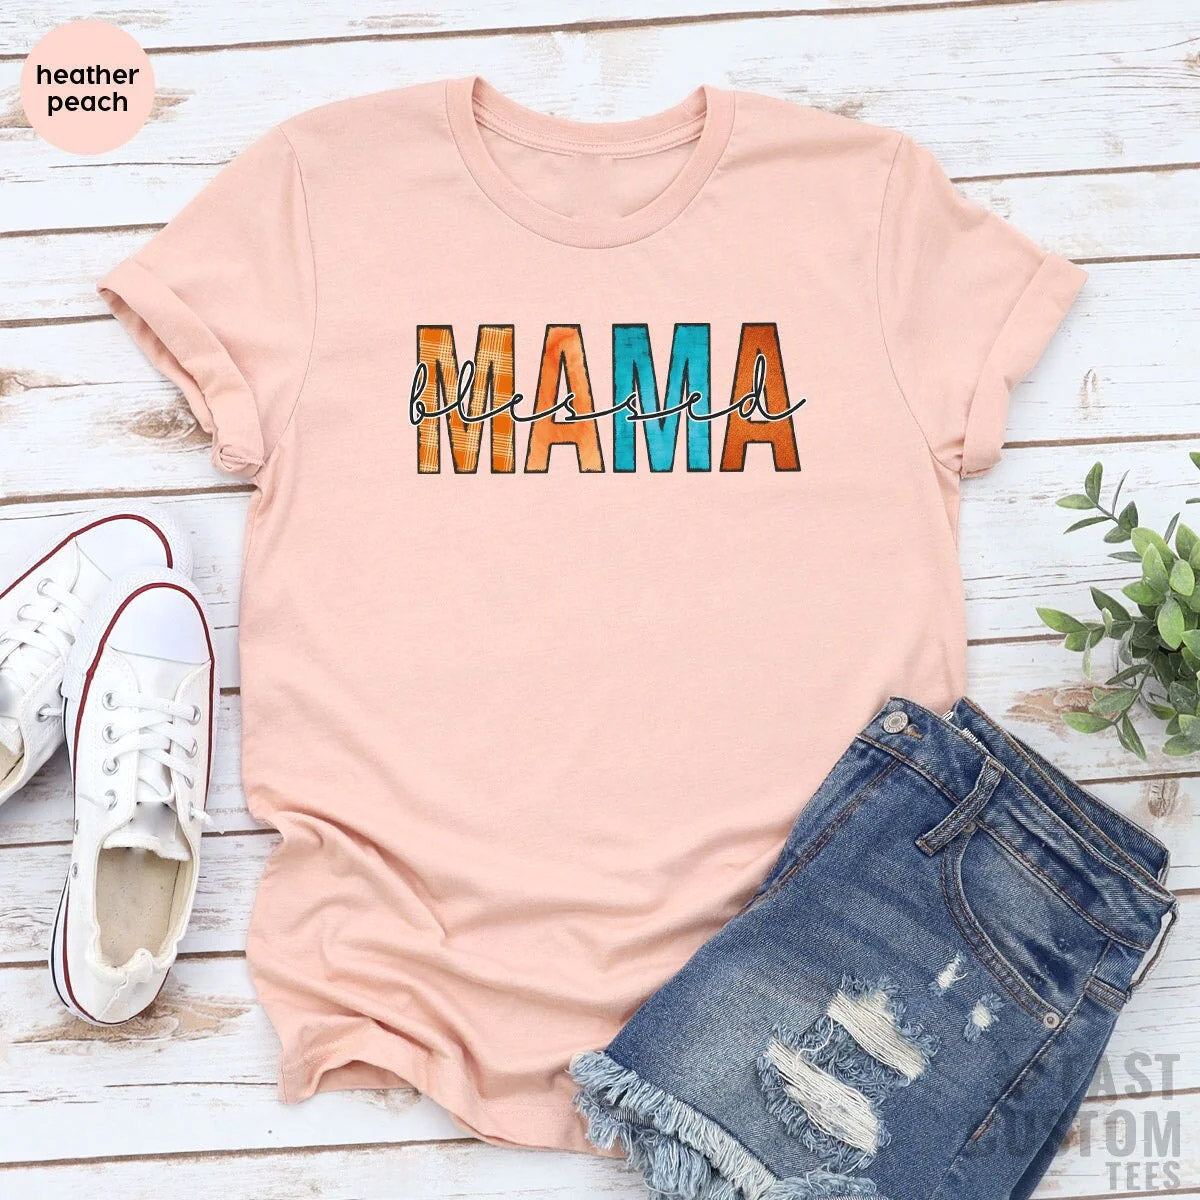 Funny Mom T-shirts-Super-Fast-Shipping - Fastdeliverytees.com